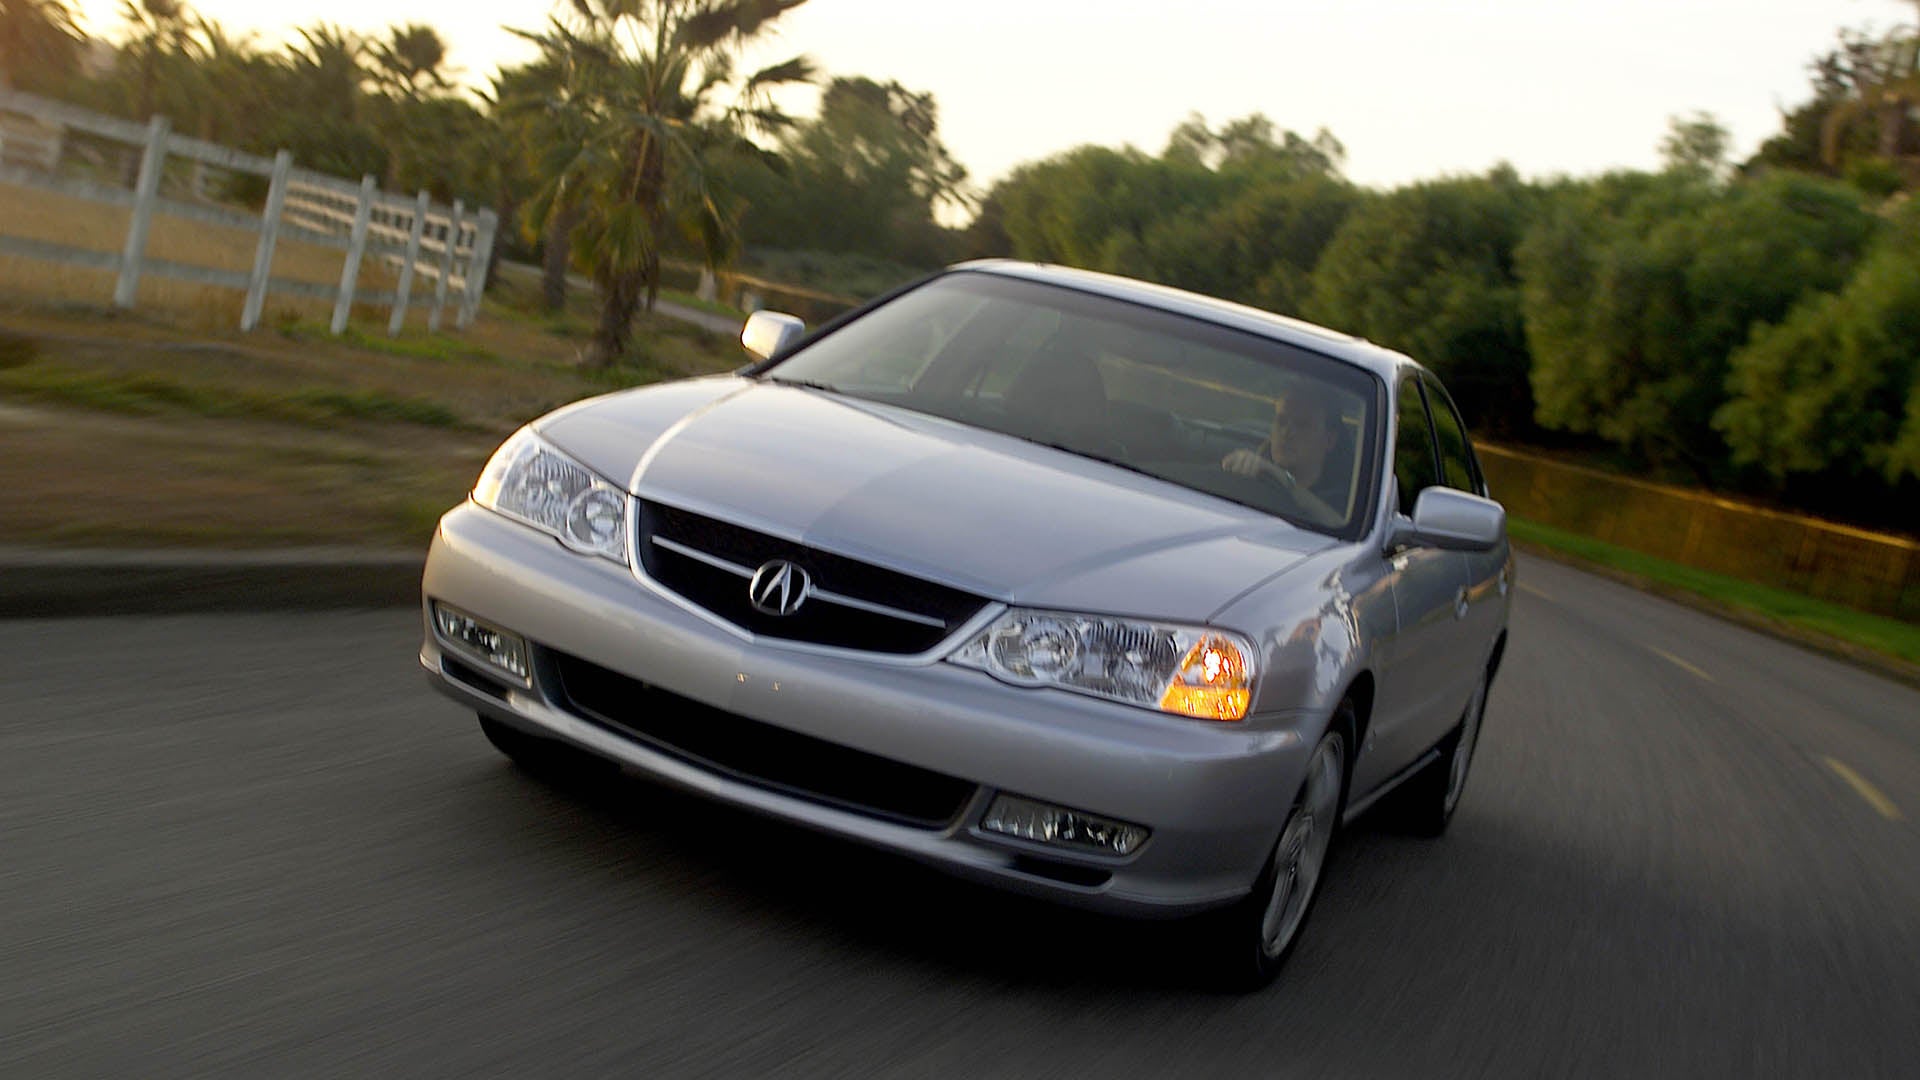 <p class="caption-title">2002-2003 3.2 TL Type S</p>, The TL Type S first arrived for 2002-2003, then later appeared for 2007-2008., <i>Acura</i>